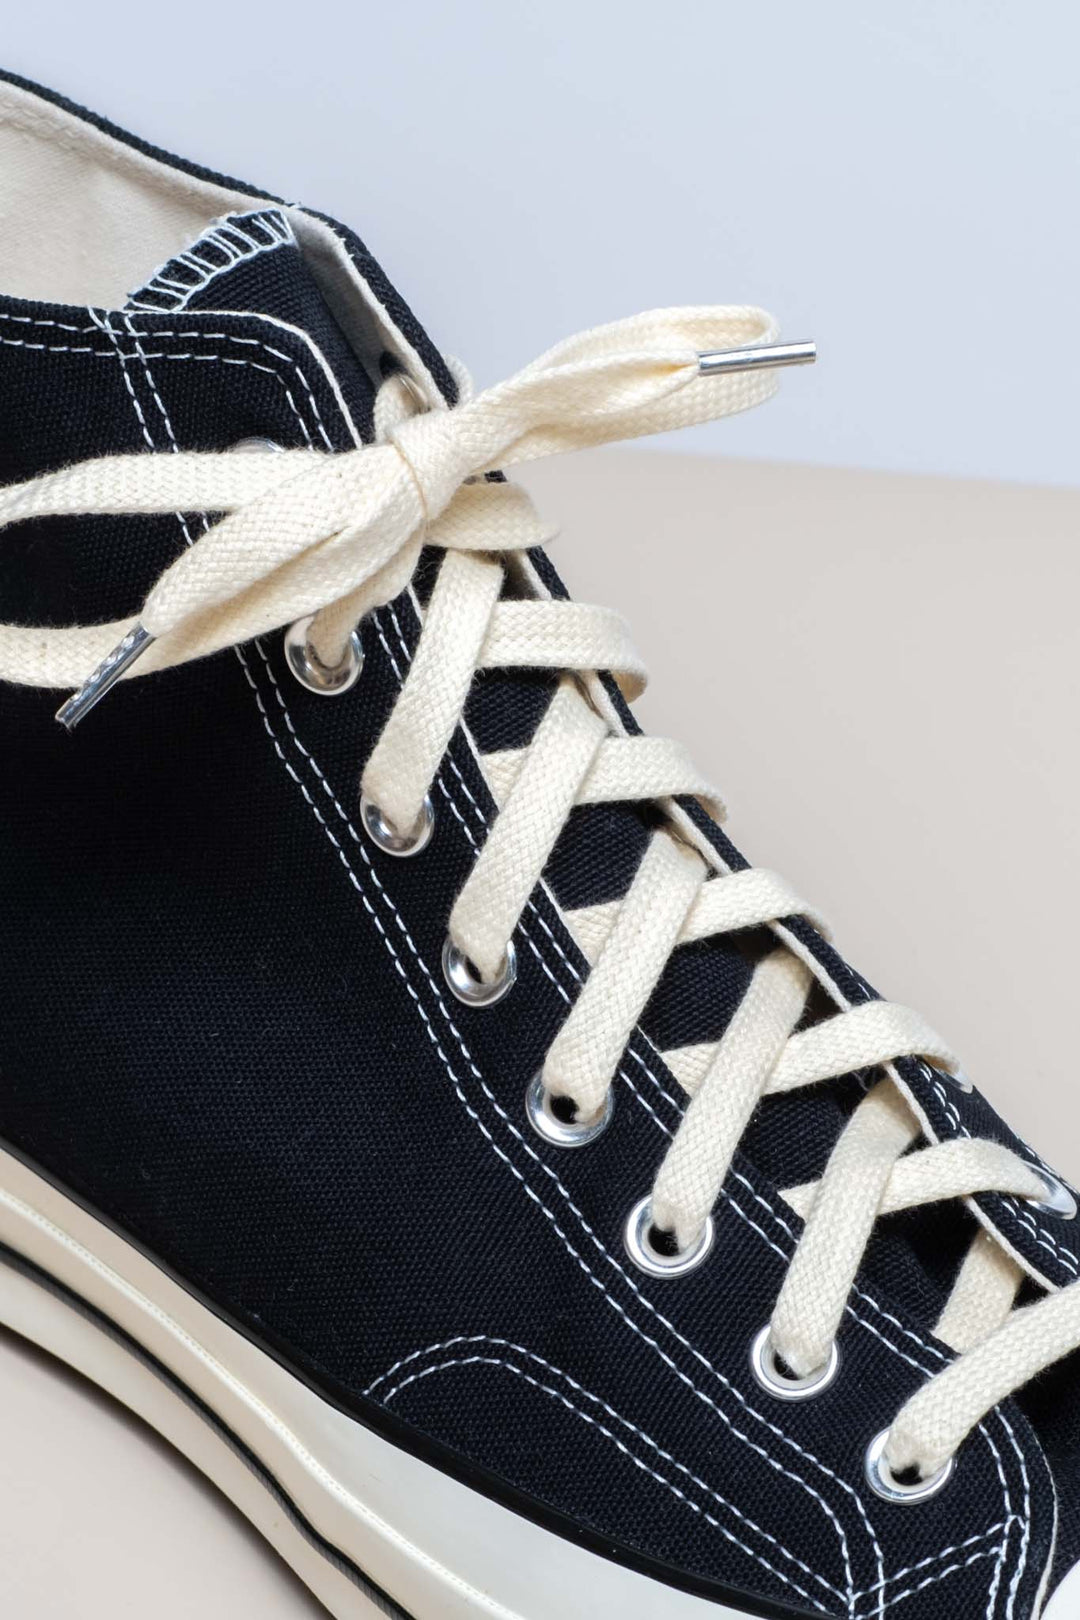 Buy Fine Leather Shoelaces in 3 Colours online at SENKELS